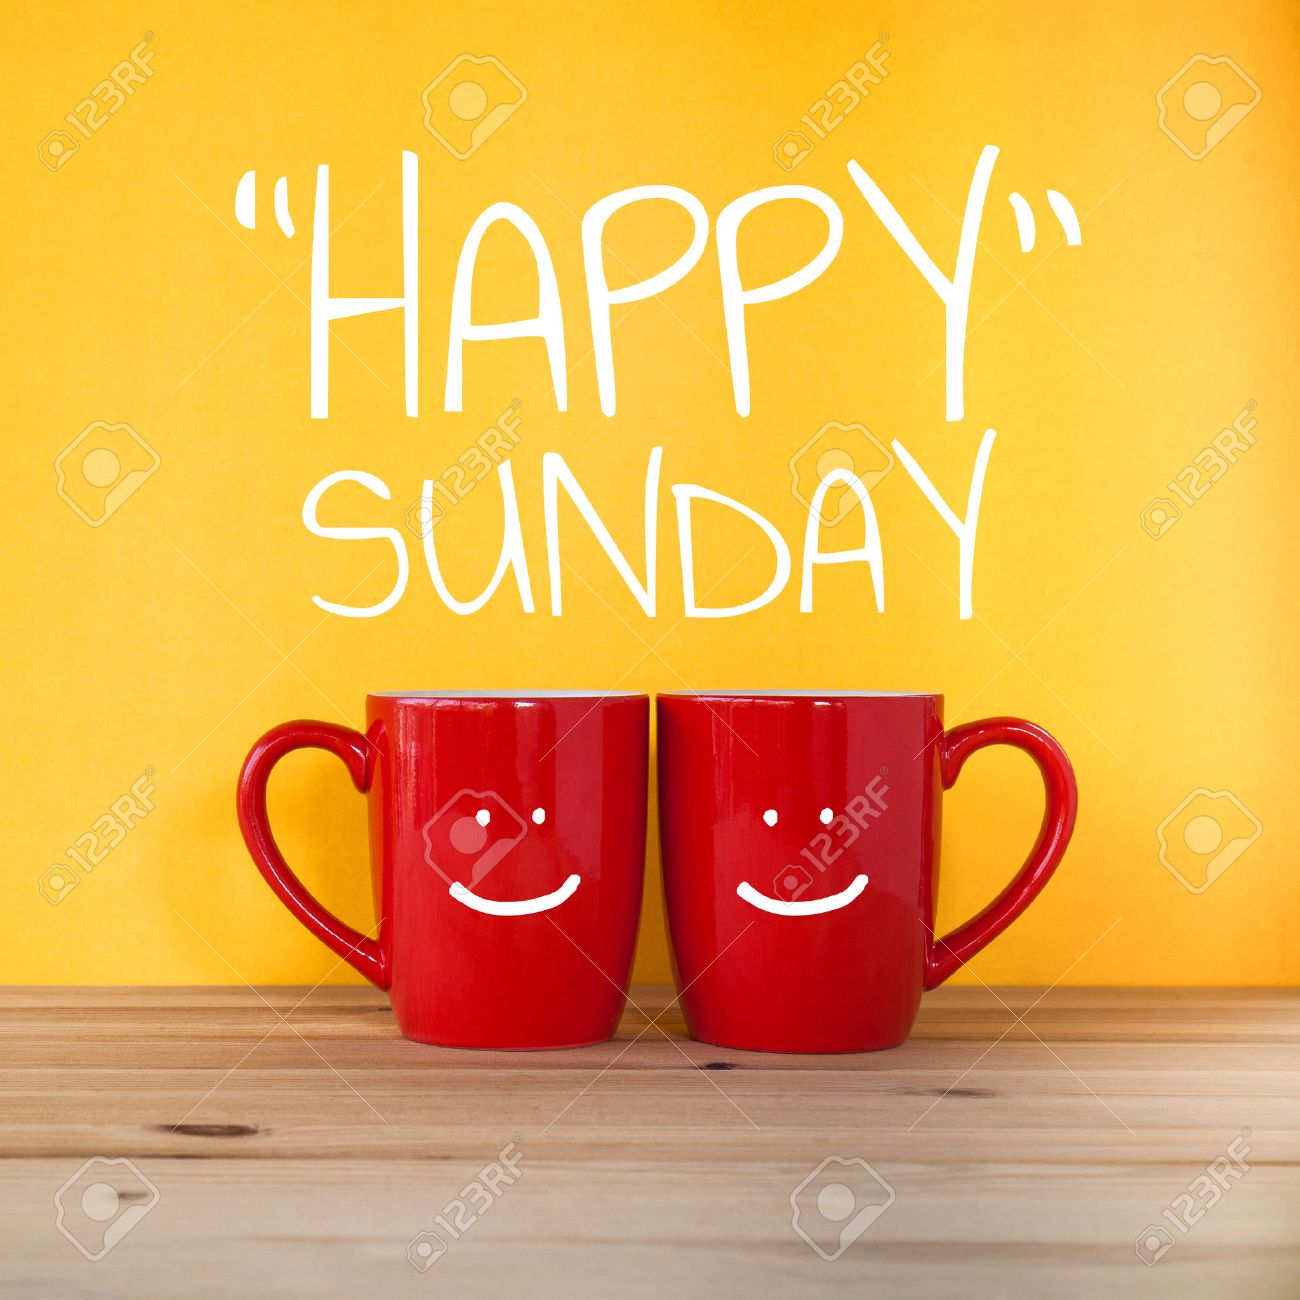 56484298-happy-sunday-word-two-cups-of-coffee-and-stand-together-to-be-heart-shape-on-yellow-background-with-.jpg